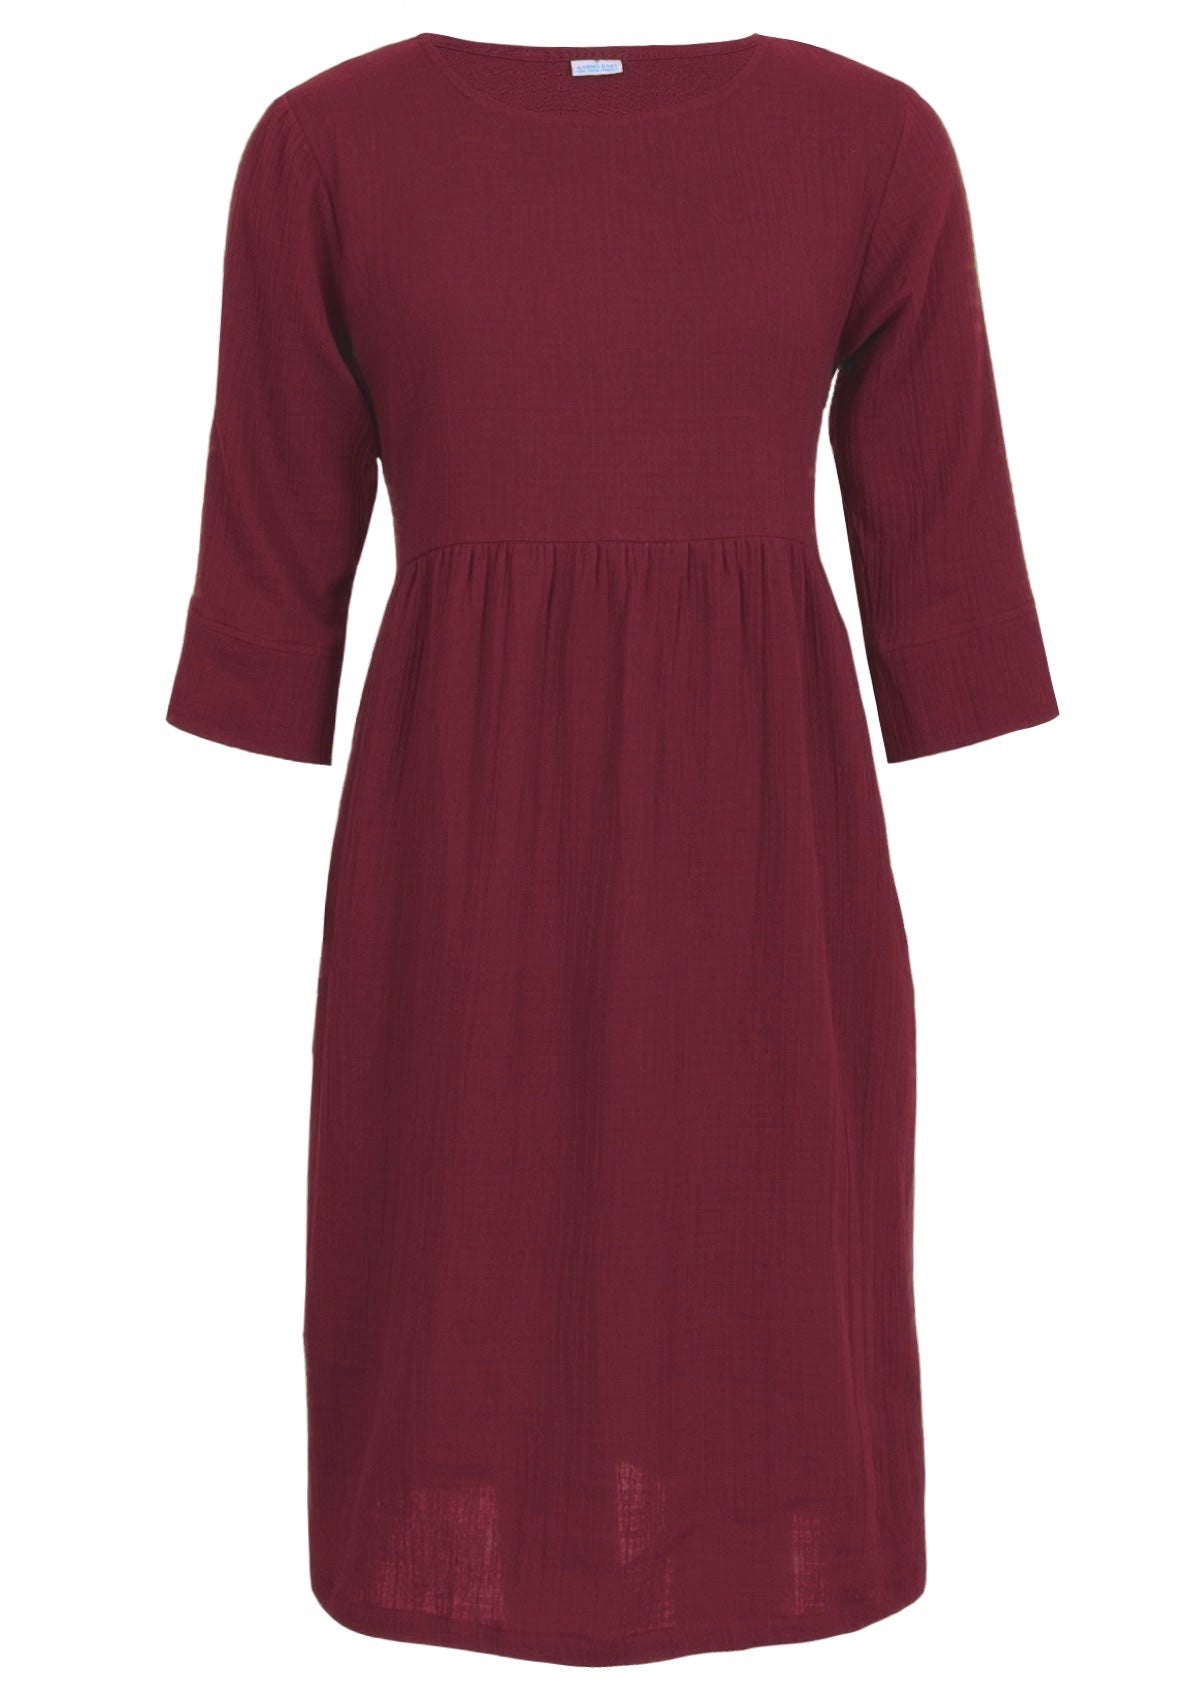 Deep red double cotton relaxed fit dress with 3/4 sleeves